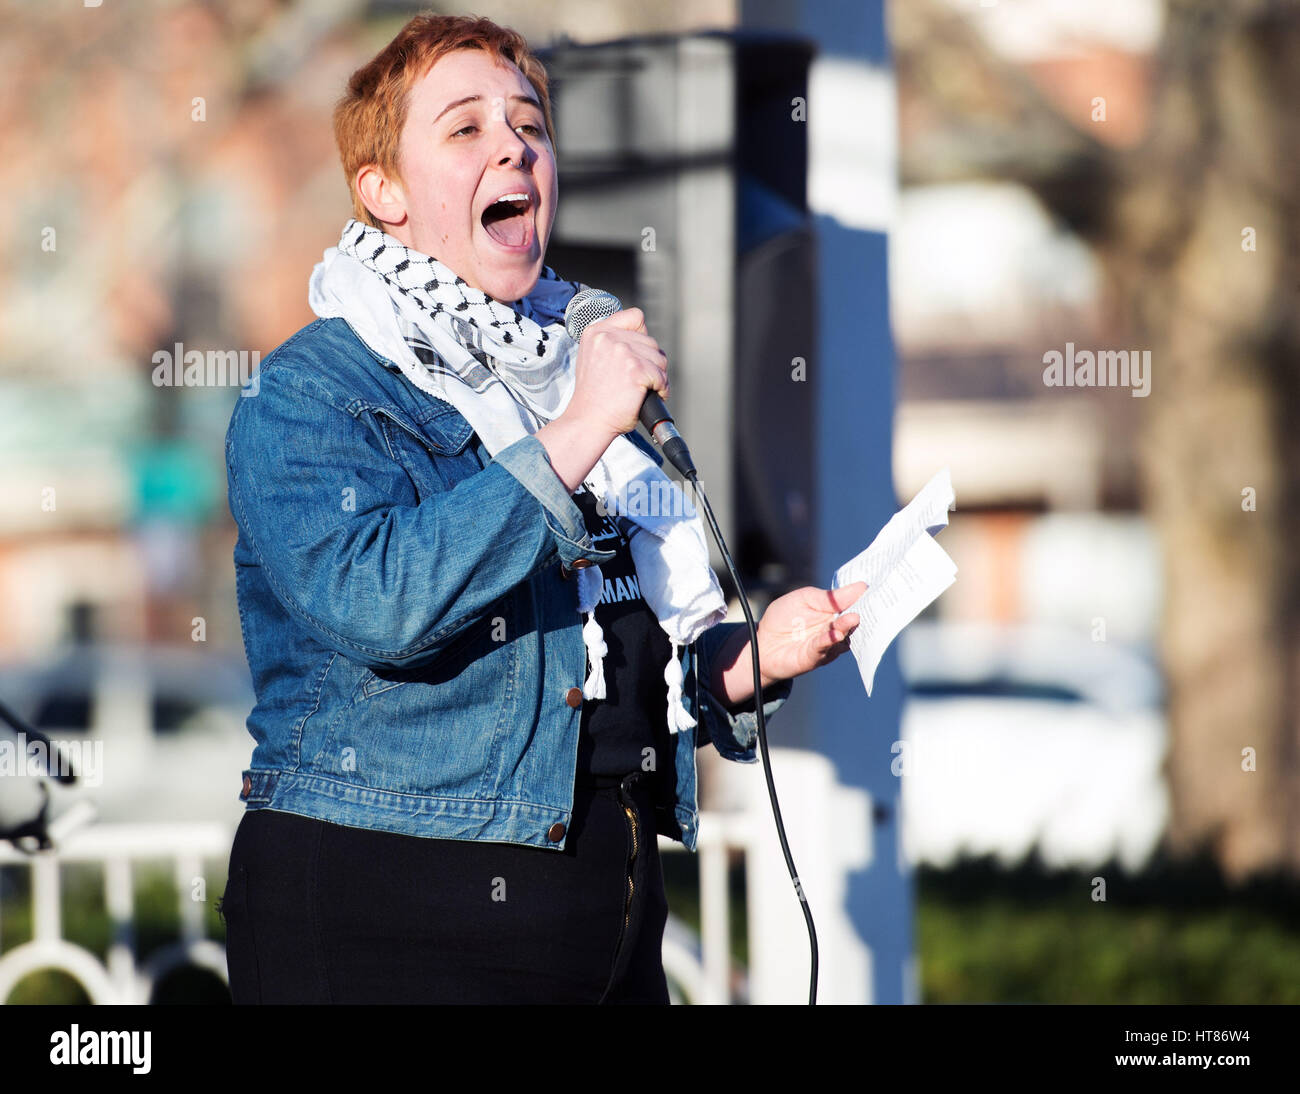 Columbus, USA. 08th Mar, 2017. Rachel Reiser of the International Socialist Organization addresses the Columbus crowd at the "A Day Without a Woman" Rally. Columbus, Ohio, USA. Credit: Brent Clark/Alamy Live News Stock Photo